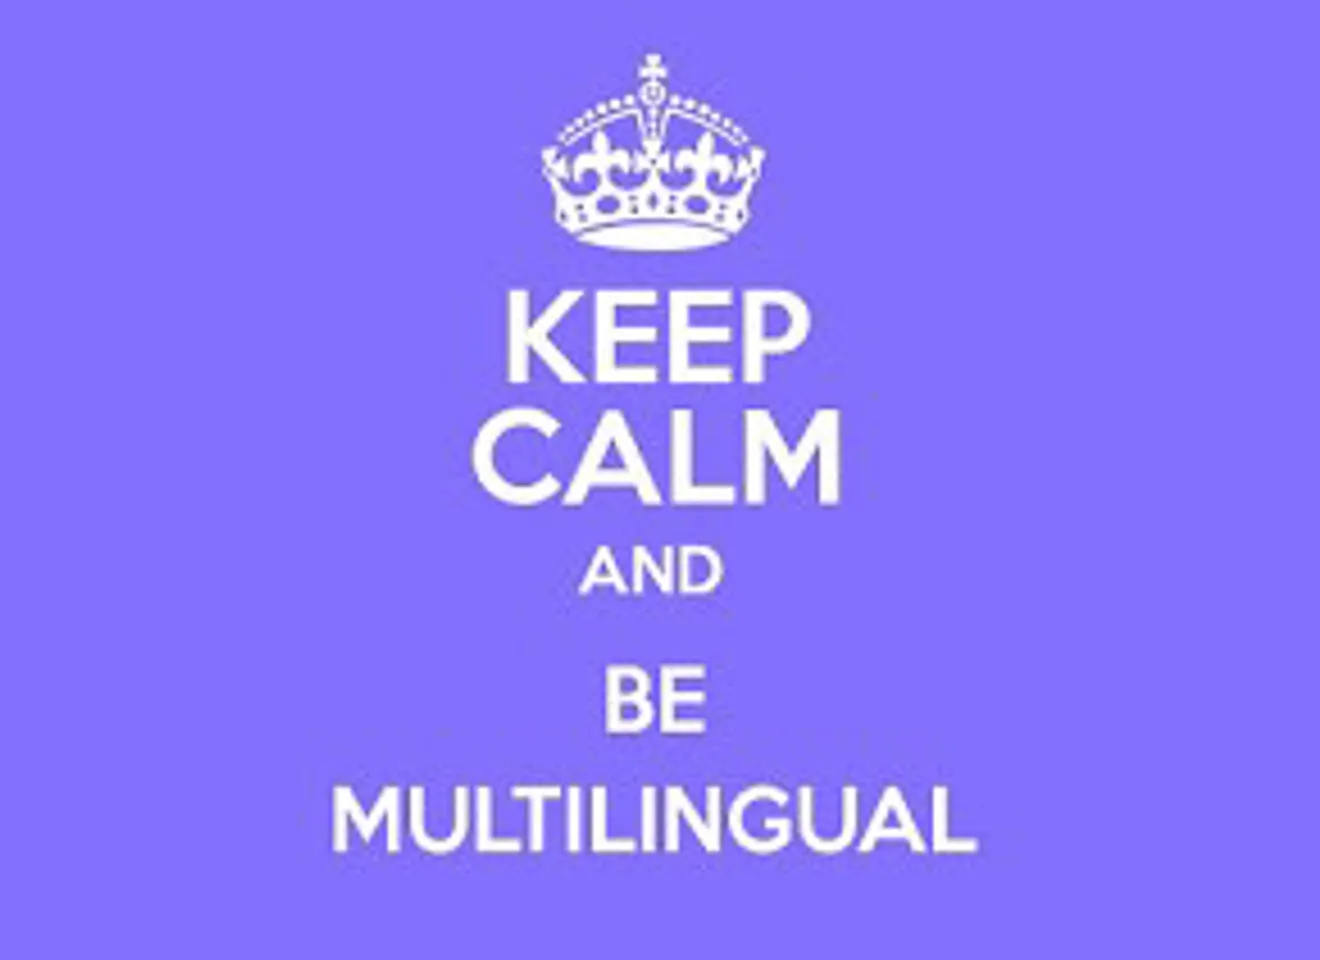 Keep Calm and be multilingual